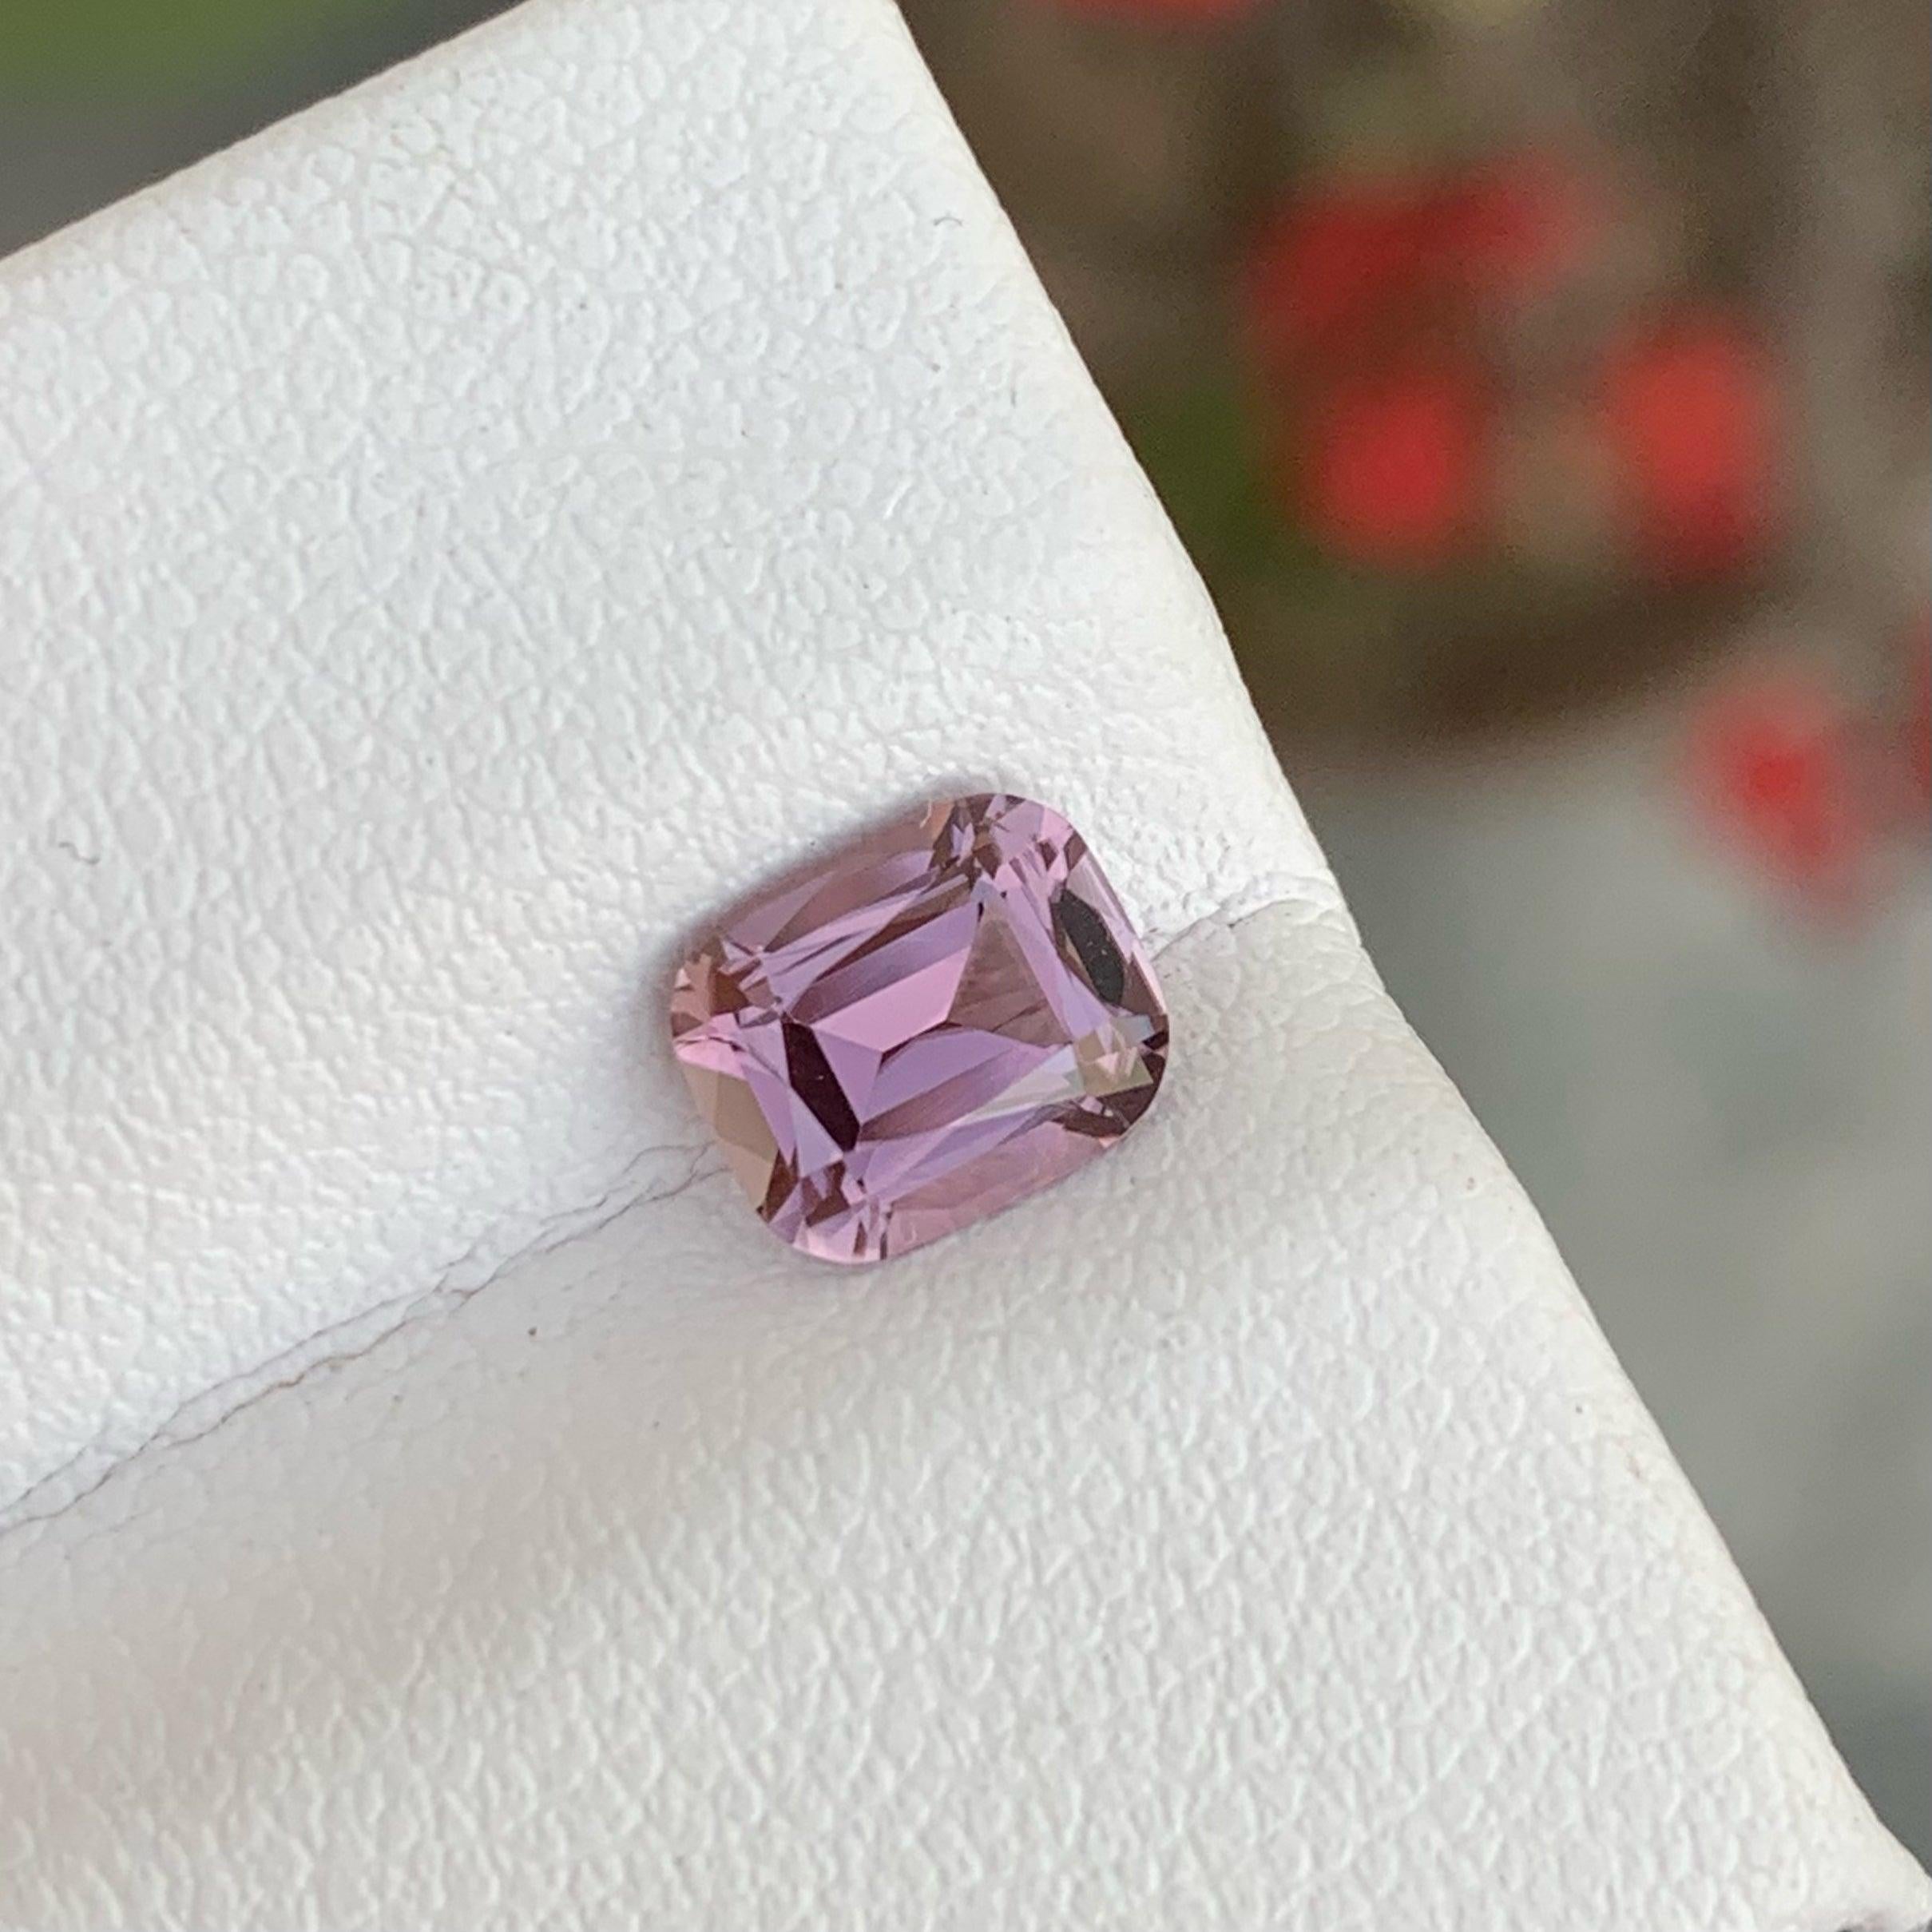 Exquisite Natural Baby Pink Tourmaline Gemstone 0.95 carats from Afghanistan has a wonderful cut in a Cushion shape, incredible Pink color. Great brilliance. This gem is totally Eye Clean Clarity.

Product Information:
GEMSTONE TYPE:	Exquisite